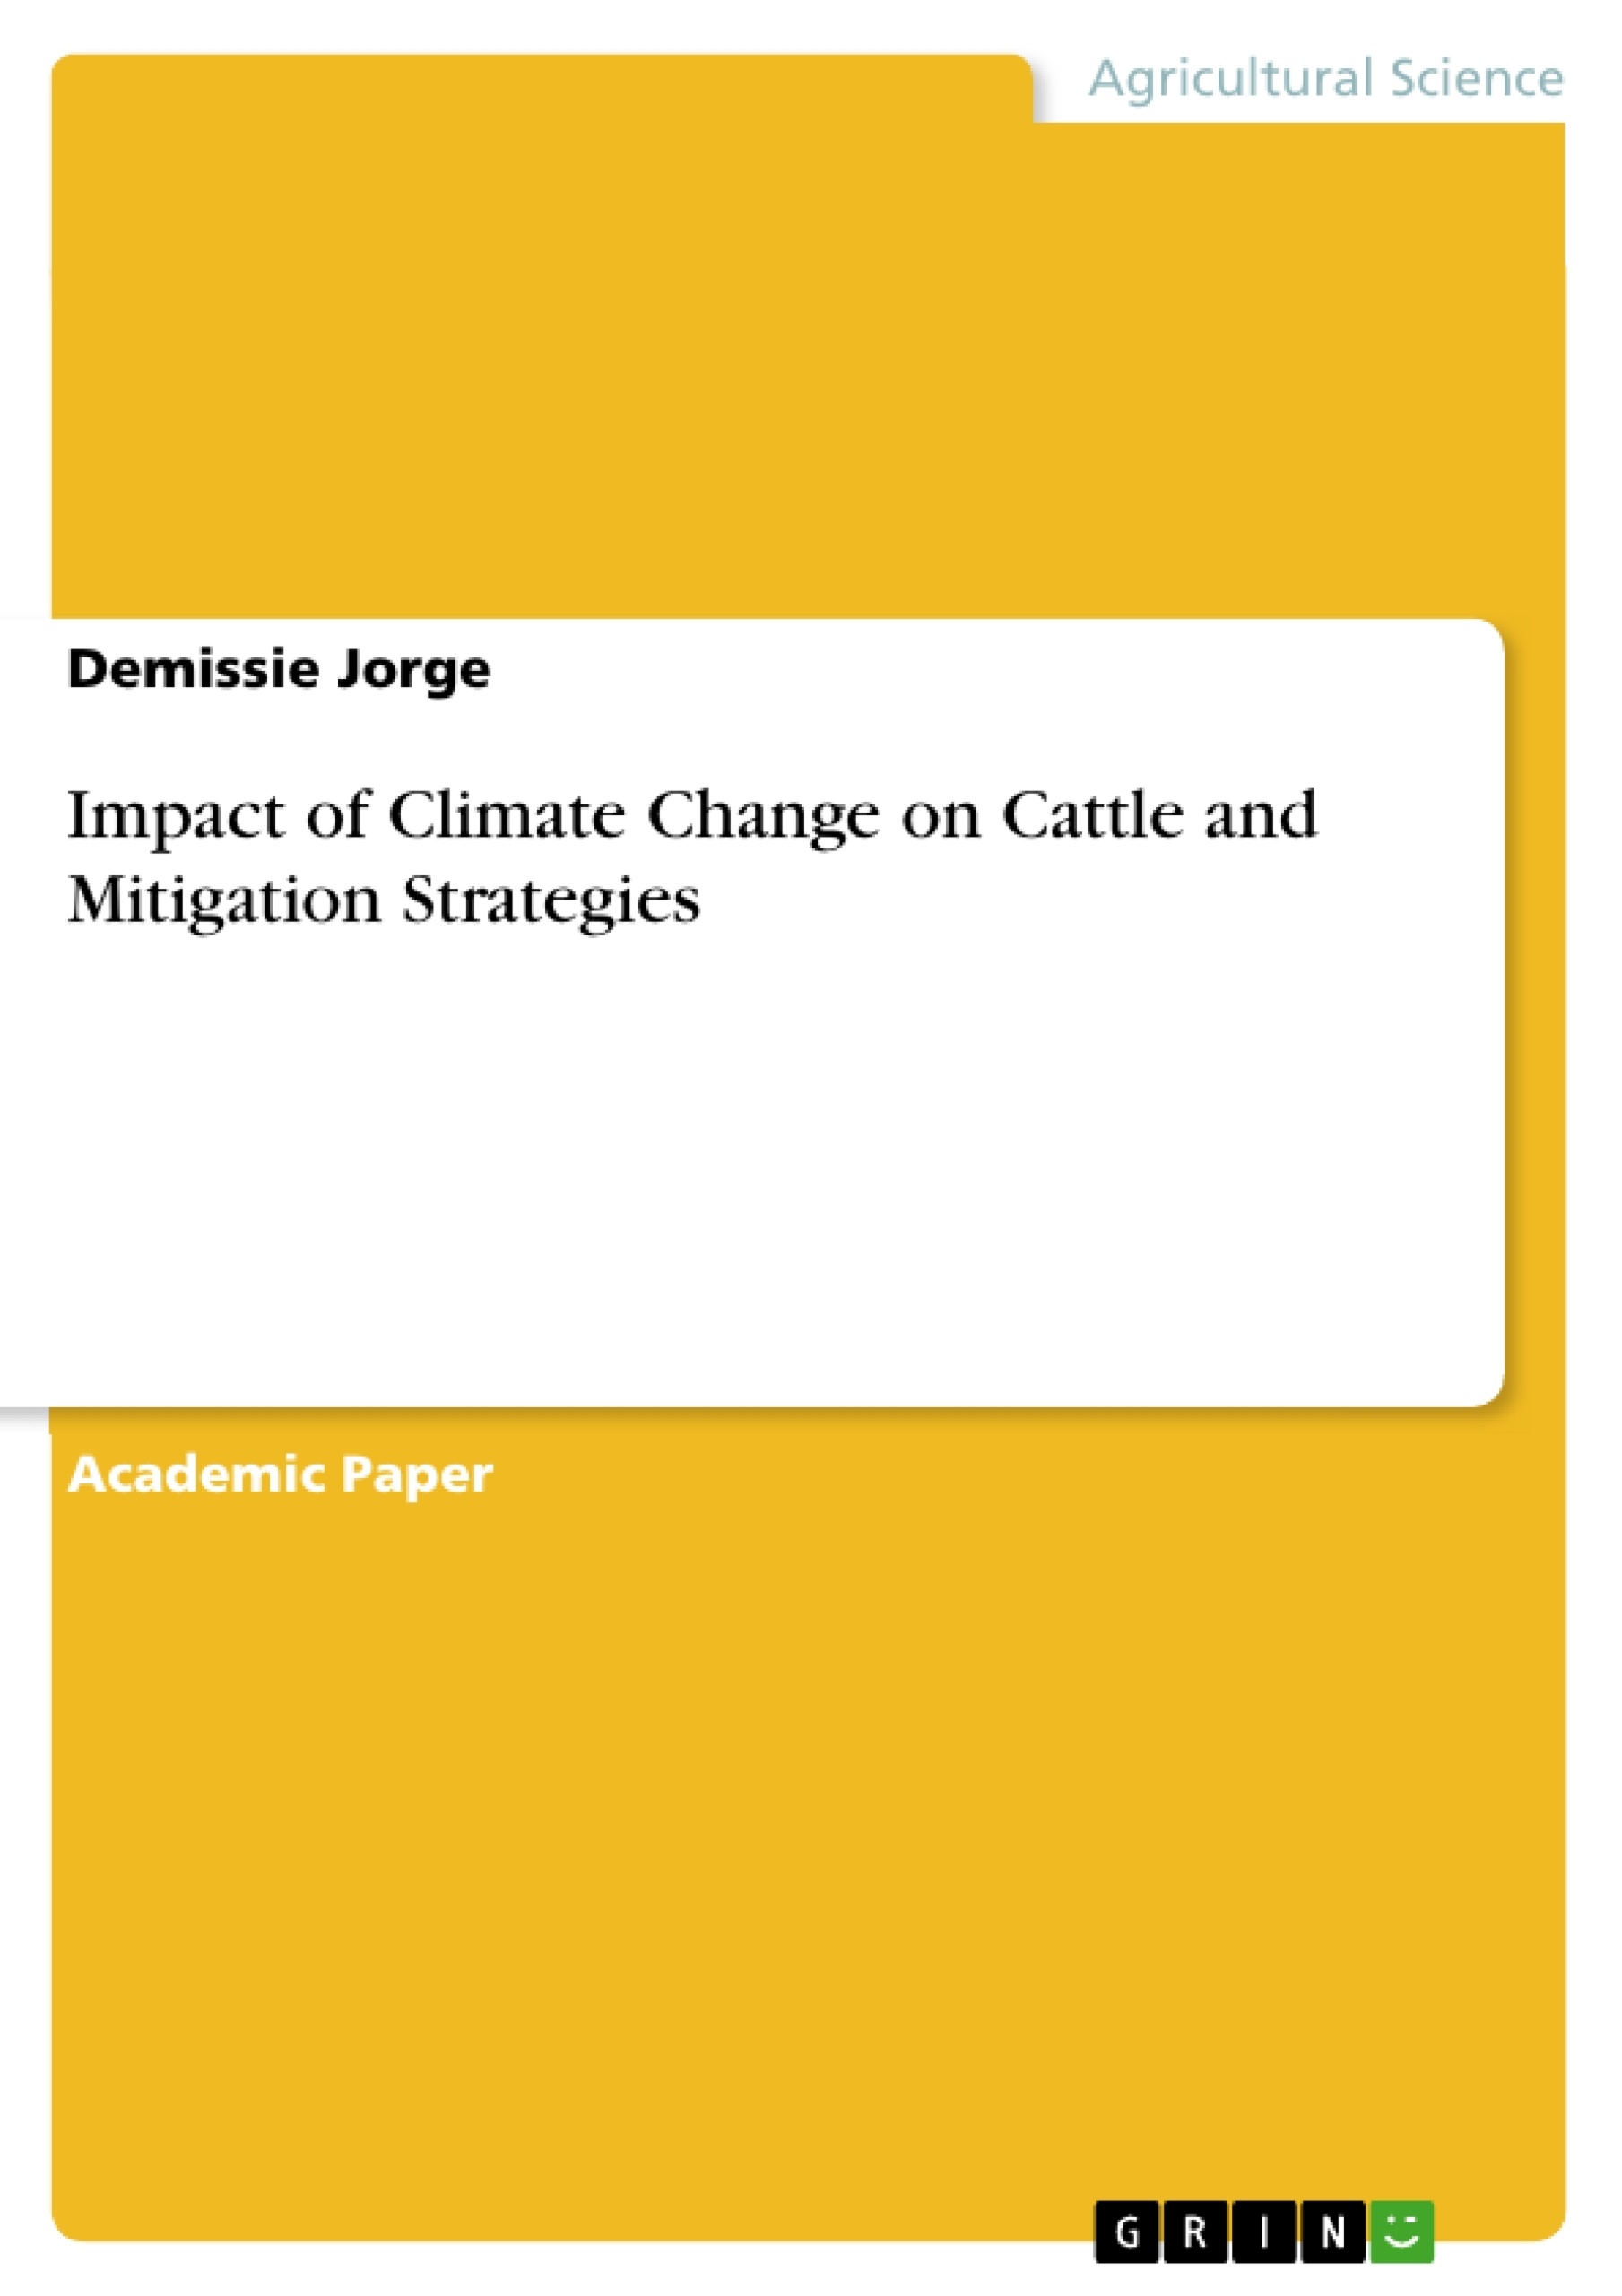 Title: Impact of Climate Change on Cattle and Mitigation Strategies